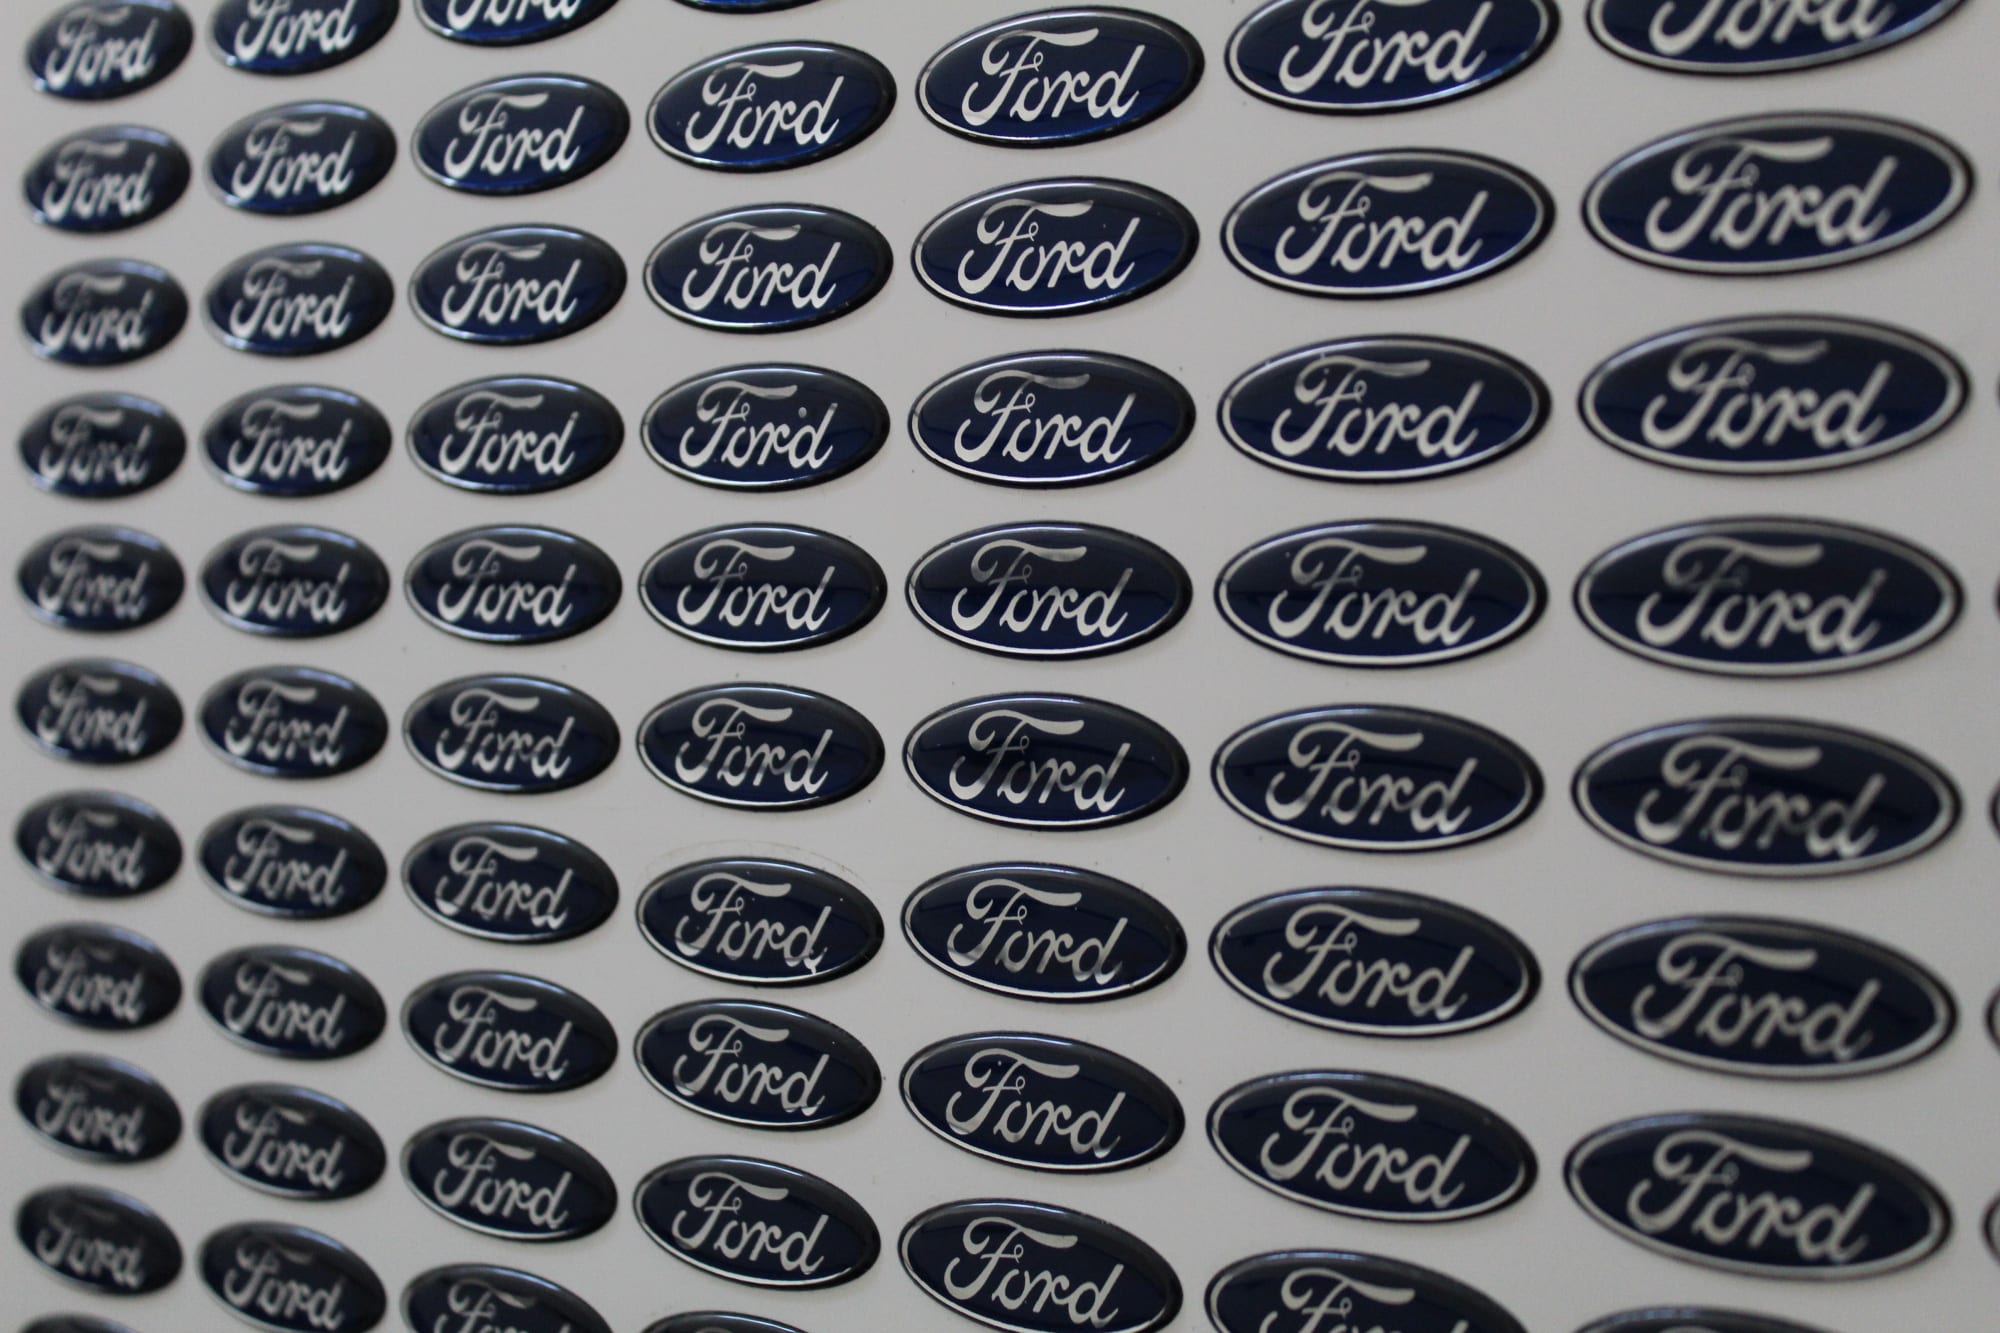 Professional 3D Domed Gloss Effect Stickers for Automotive Dealers